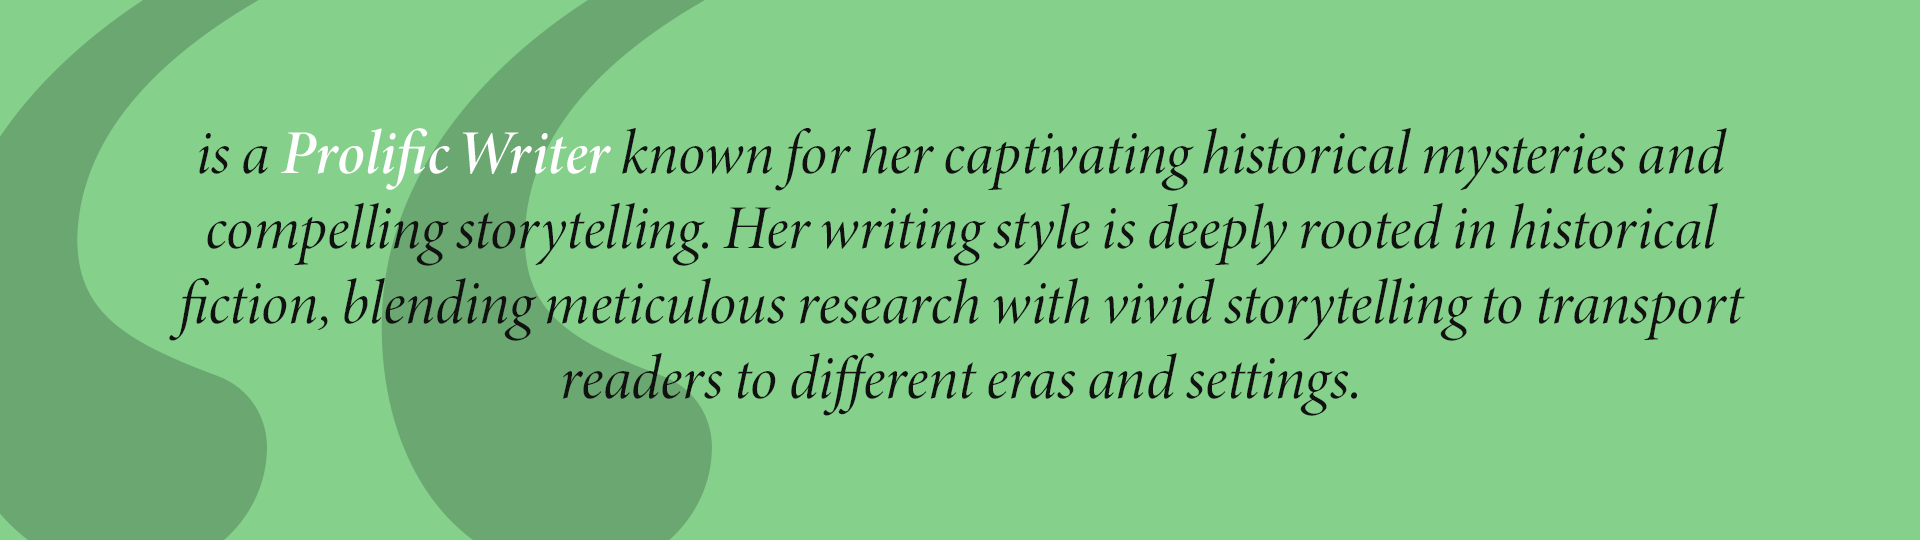 is a Prolific Writer known for her captivating historical mysteries and compelling storytelling. Her writing style is deeply rooted in historical
fiction, blending meticulous research with vivid storytelling to transport readers to different eras and settings.